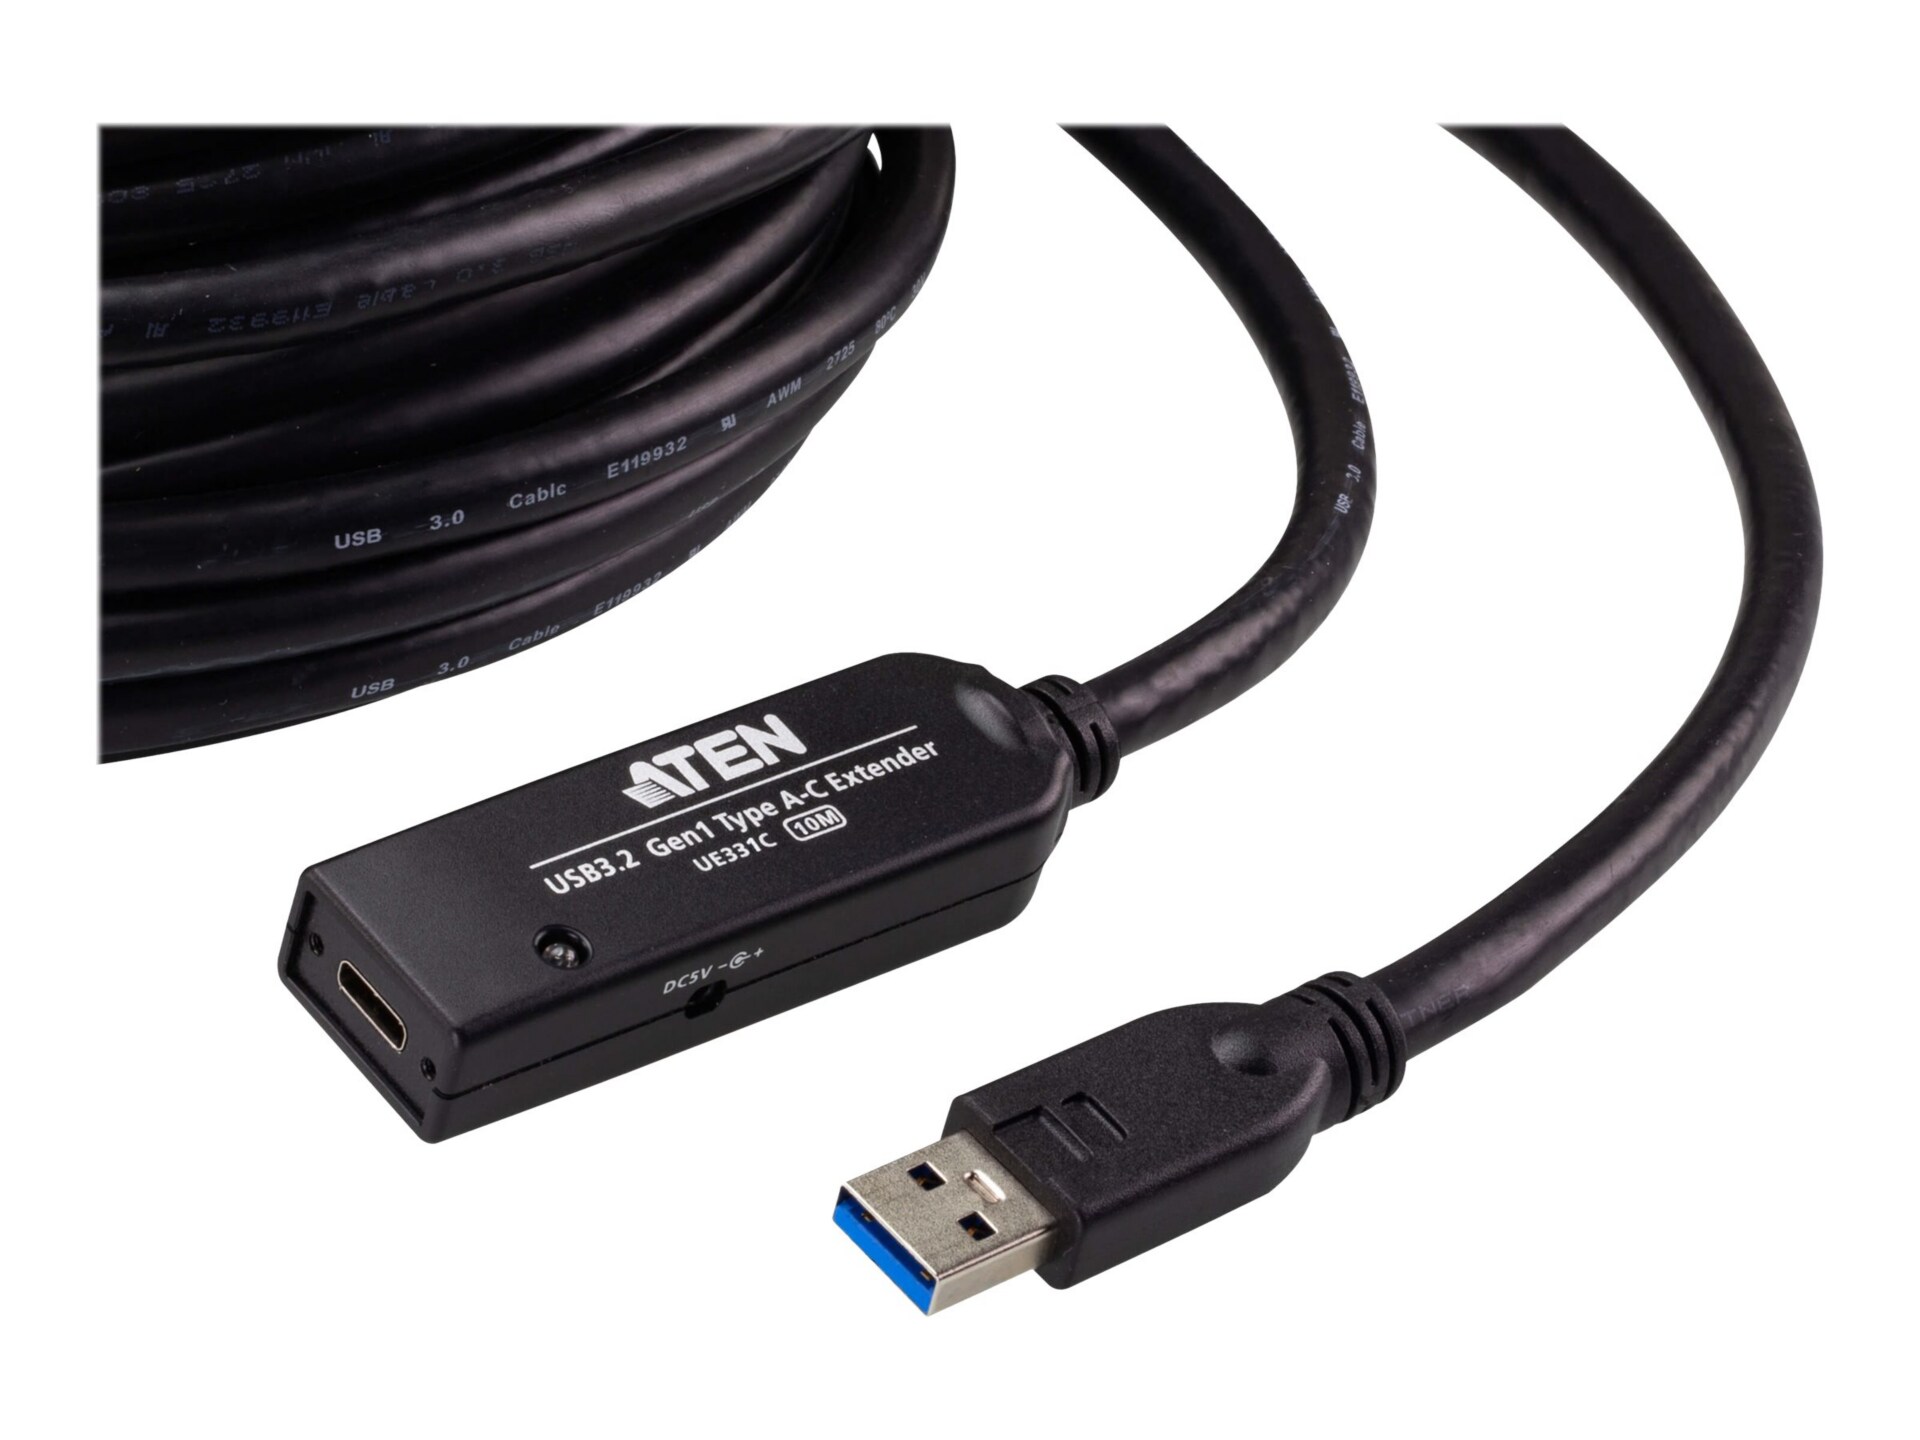 ATEN UE331C - USB extension cable - USB to 24 pin USB-C - 33 ft